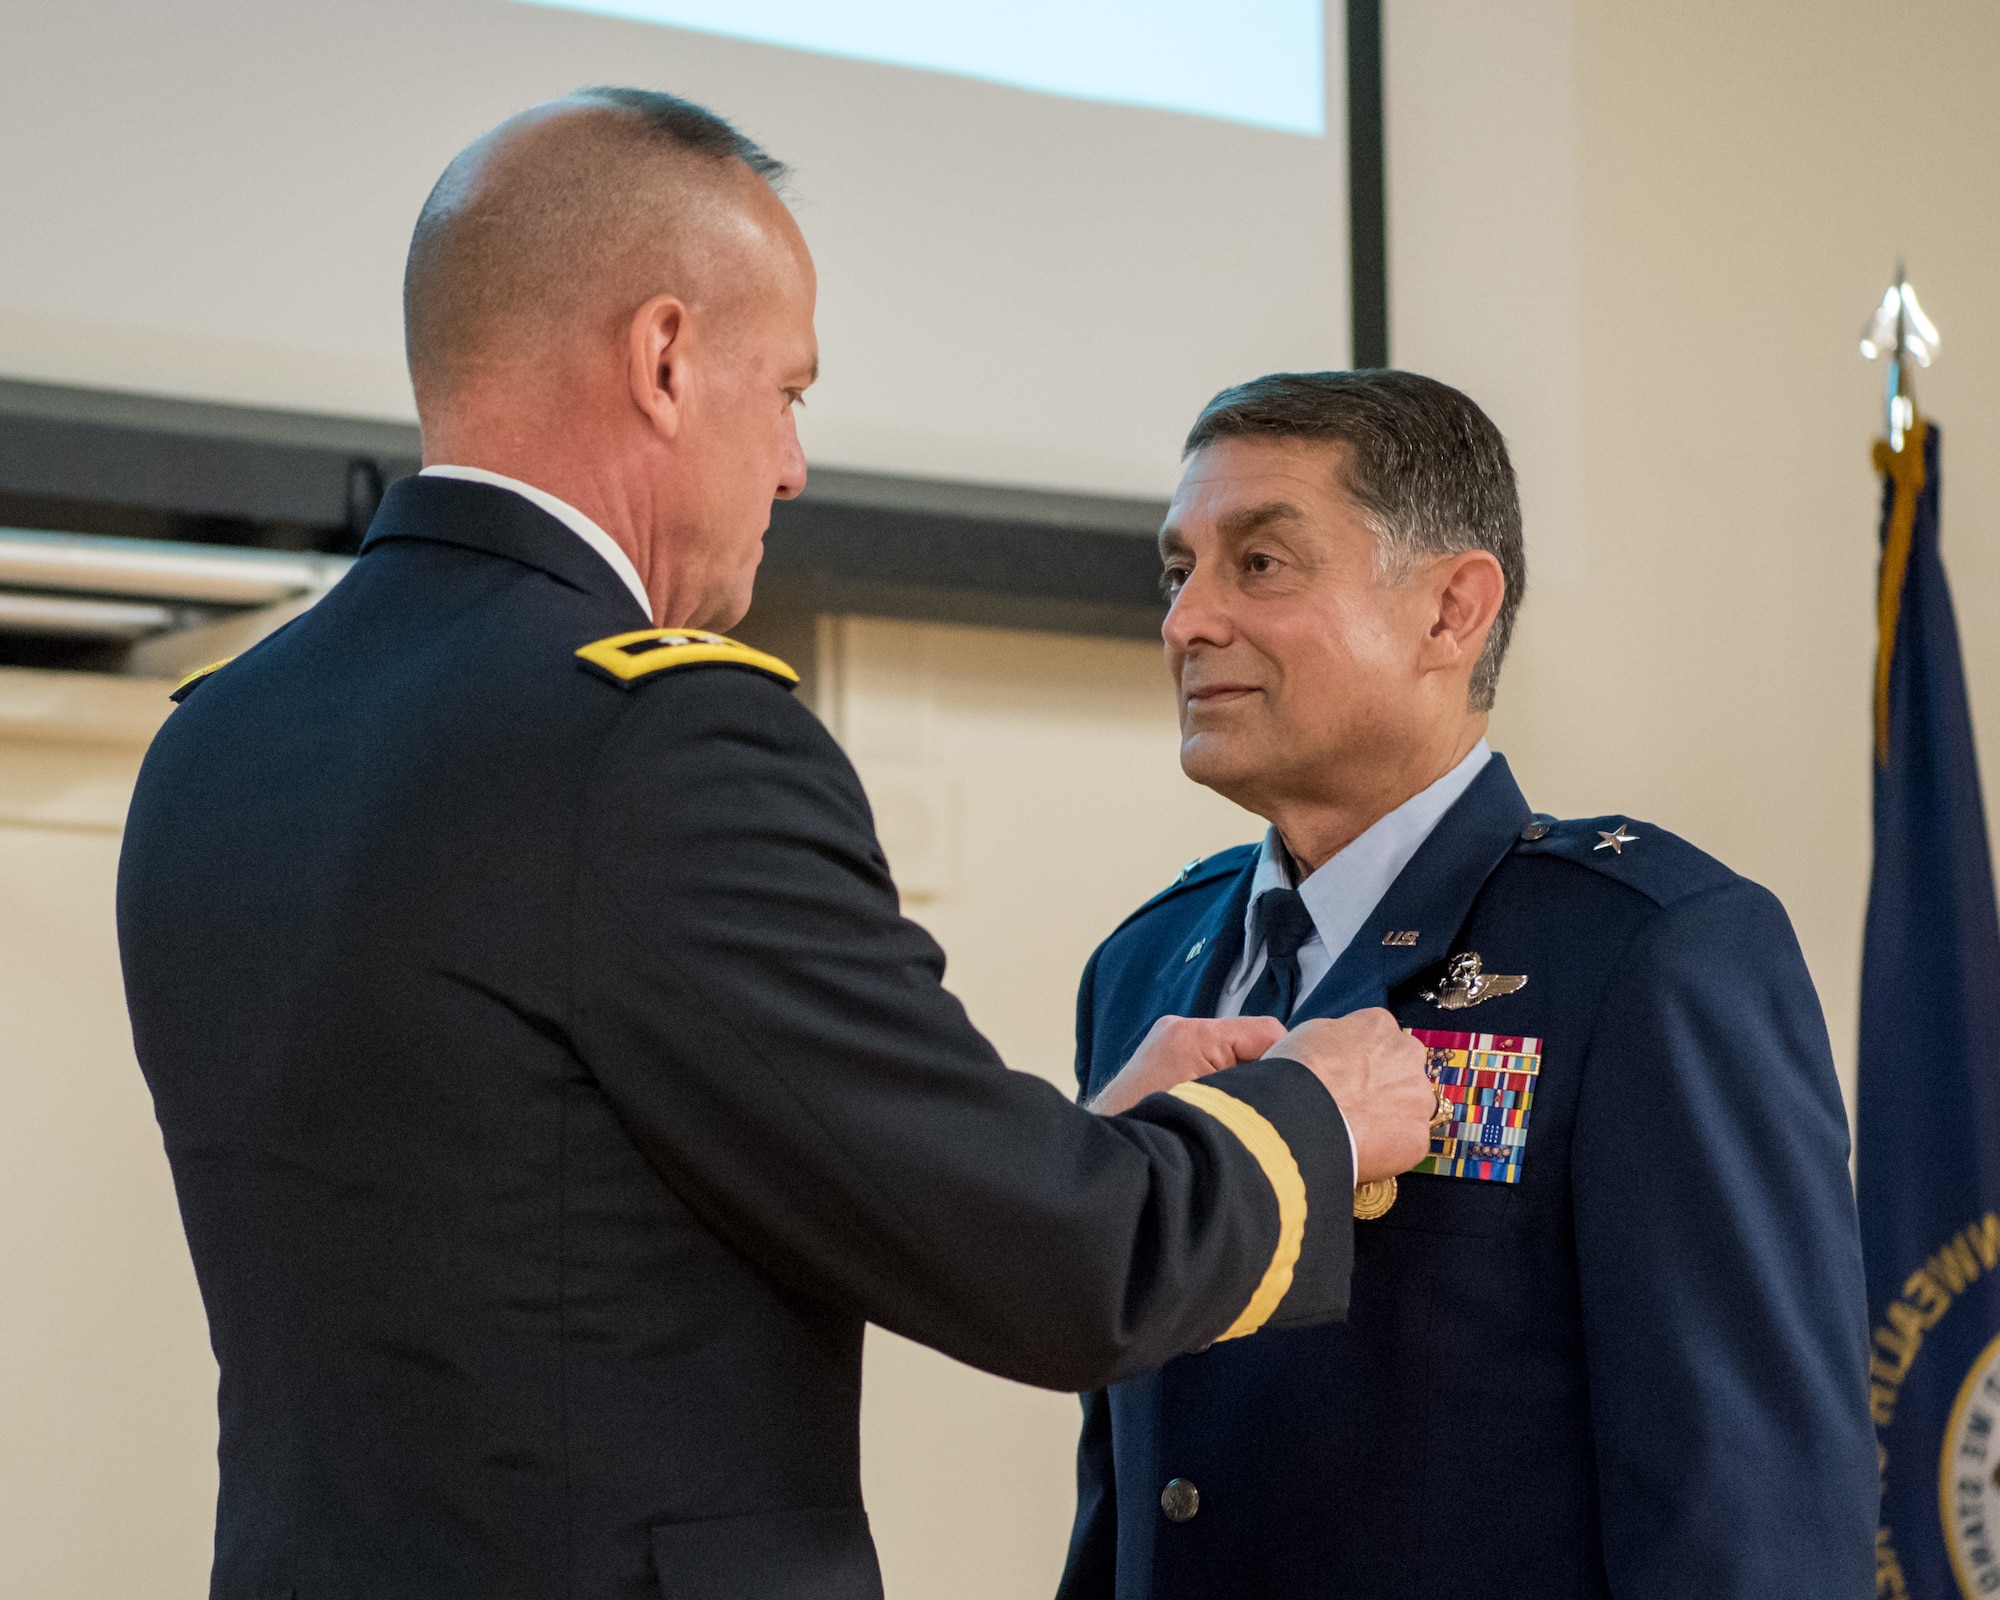 Brig. Gen. Warren Hurst (right), Kentucky’s outgoing assistant adjutant general for Air, is pinned with the Kentucky Distinguished Service Medal by Army Maj. Gen. Stephen Hogan, Kentucky’s adjutant general, during Hurst’s retirement ceremony at the Kentucky Air National Guard Base in Louisville, Ky., Nov. 16, 2019. Hurst is retiring after more than 34 years of service to the active-duty Air Force and Kentucky Air National Guard. (U.S. Air National Guard photo by Staff Sgt. Joshua Horton)